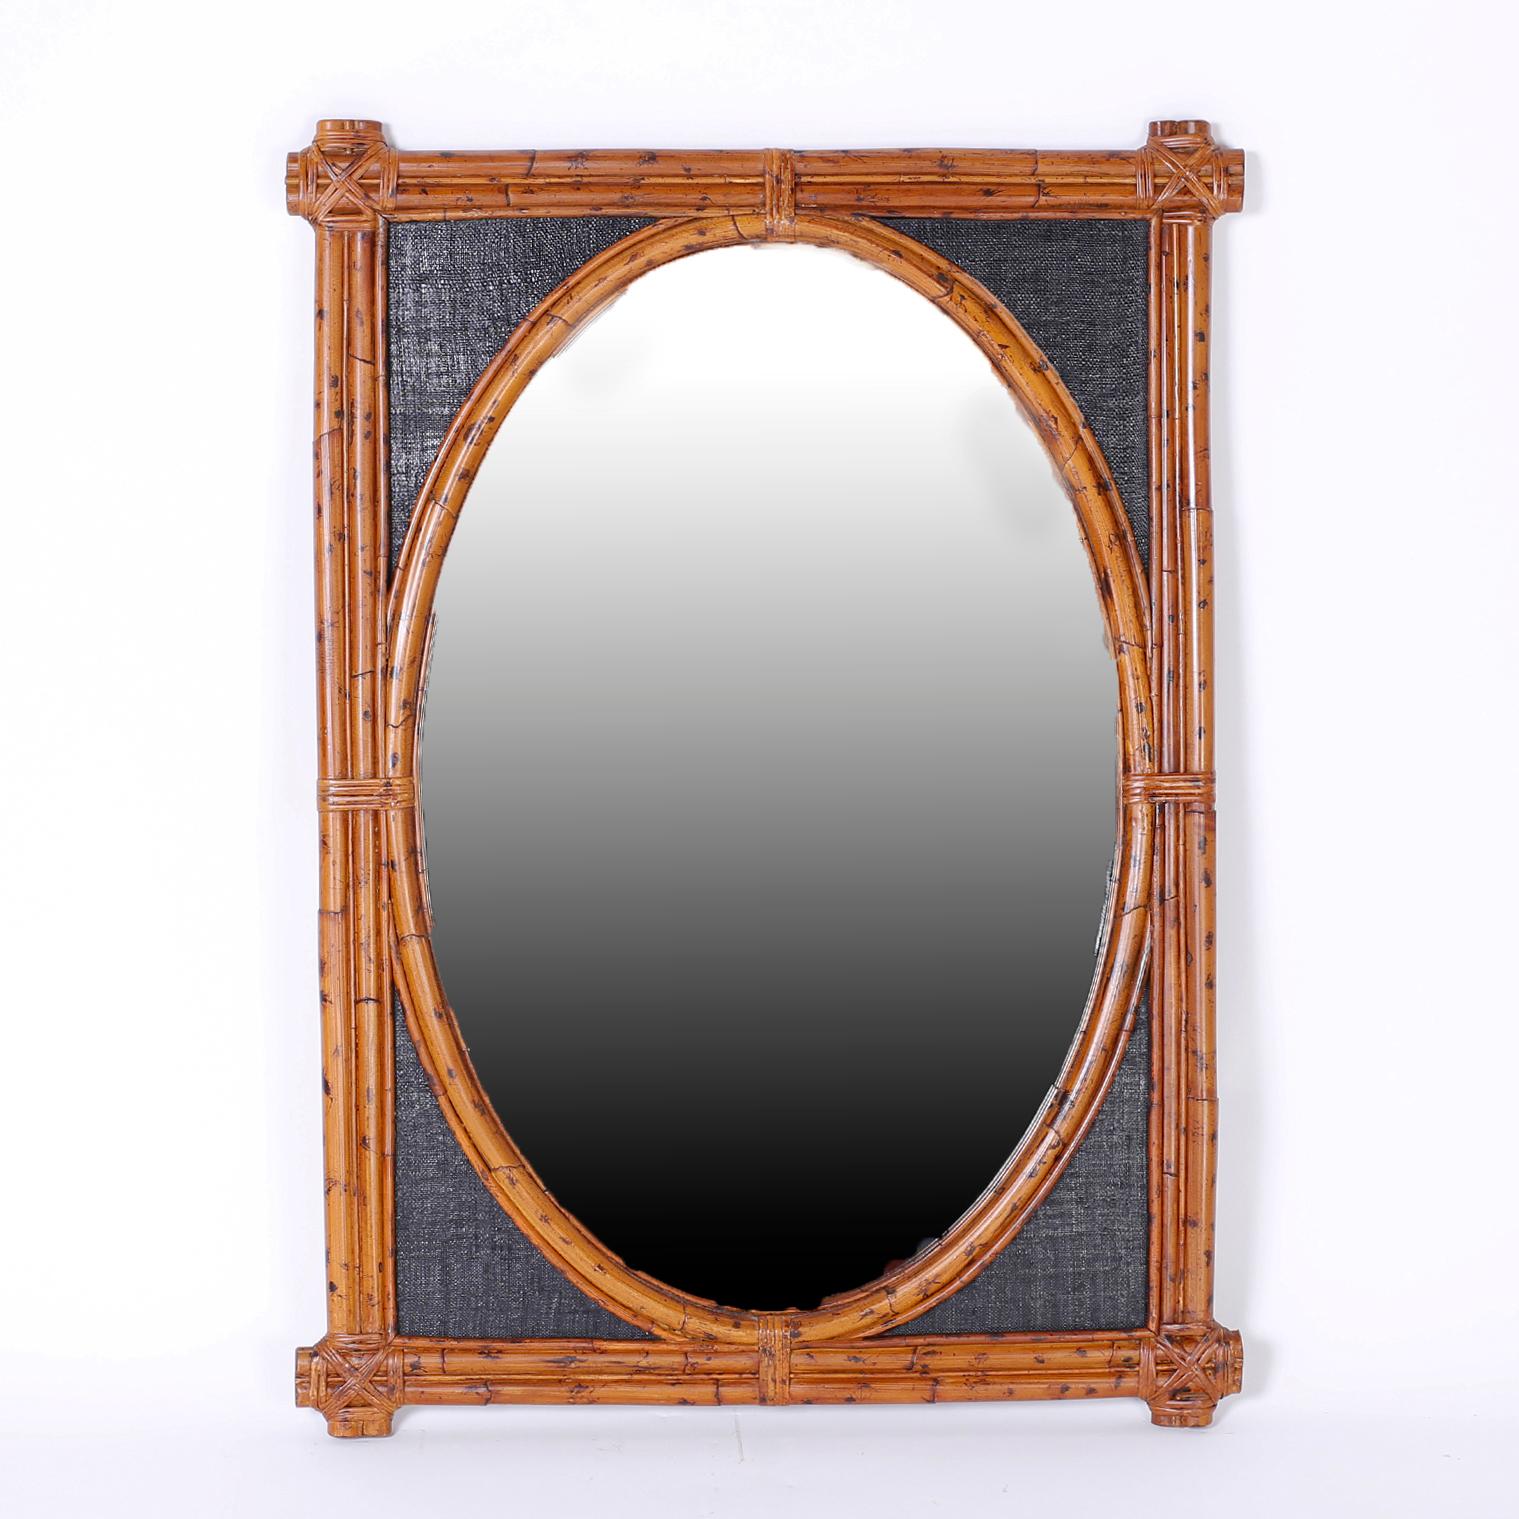 Midcentury pair of wall mirrors with a rectangular burnt bamboo frame around an oval mirror framed in bent burnt bamboo with inside panels of black painted grasscloth.